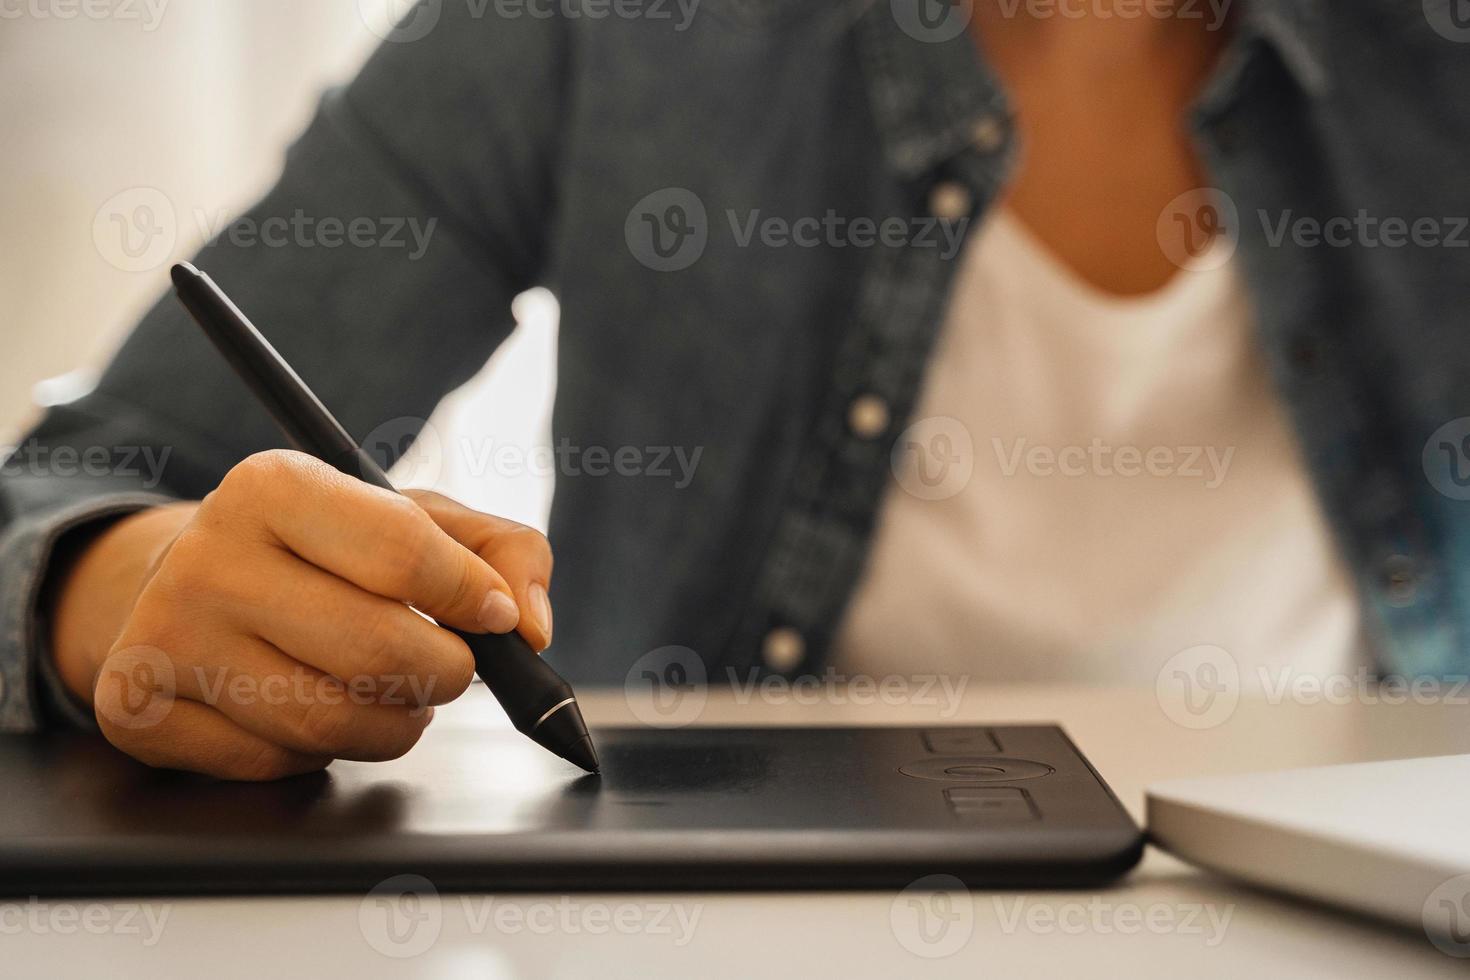 Female hand with pen-like stylus and graphic tablet photo